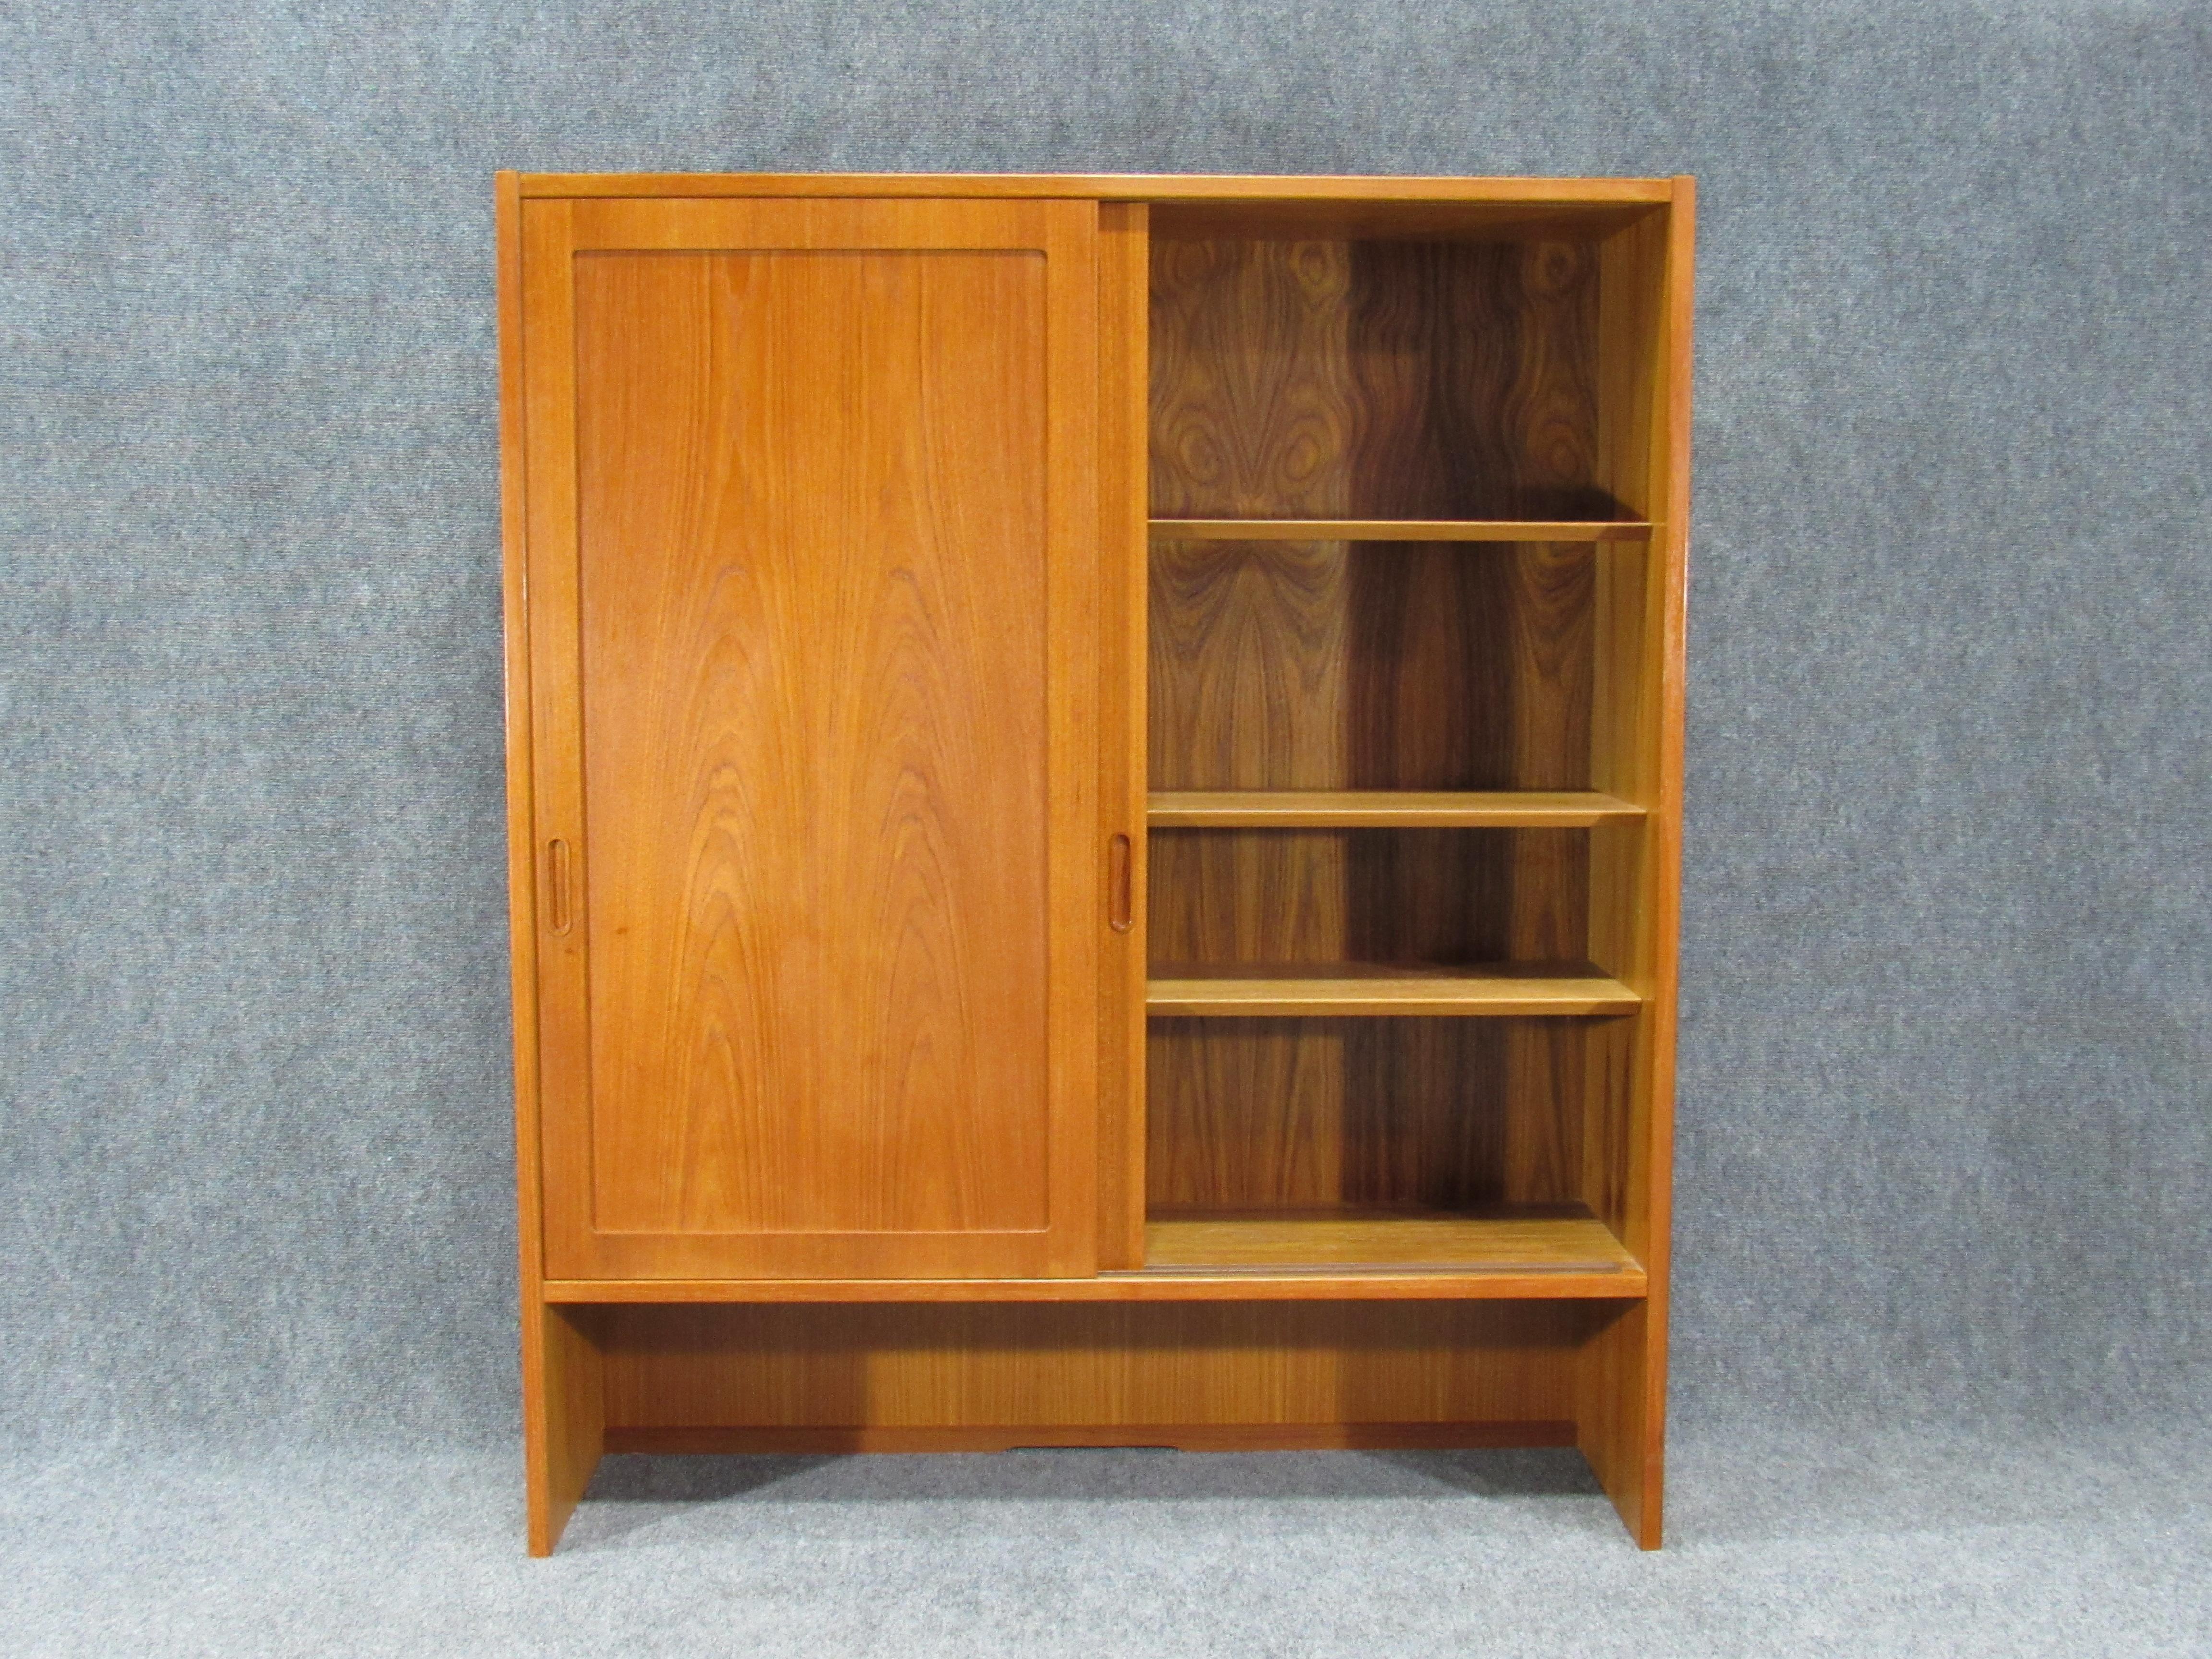 Mid-20th Century Pair of Midcentury, Danish Modern Teak Cabinets by Poul Hundevad for HU